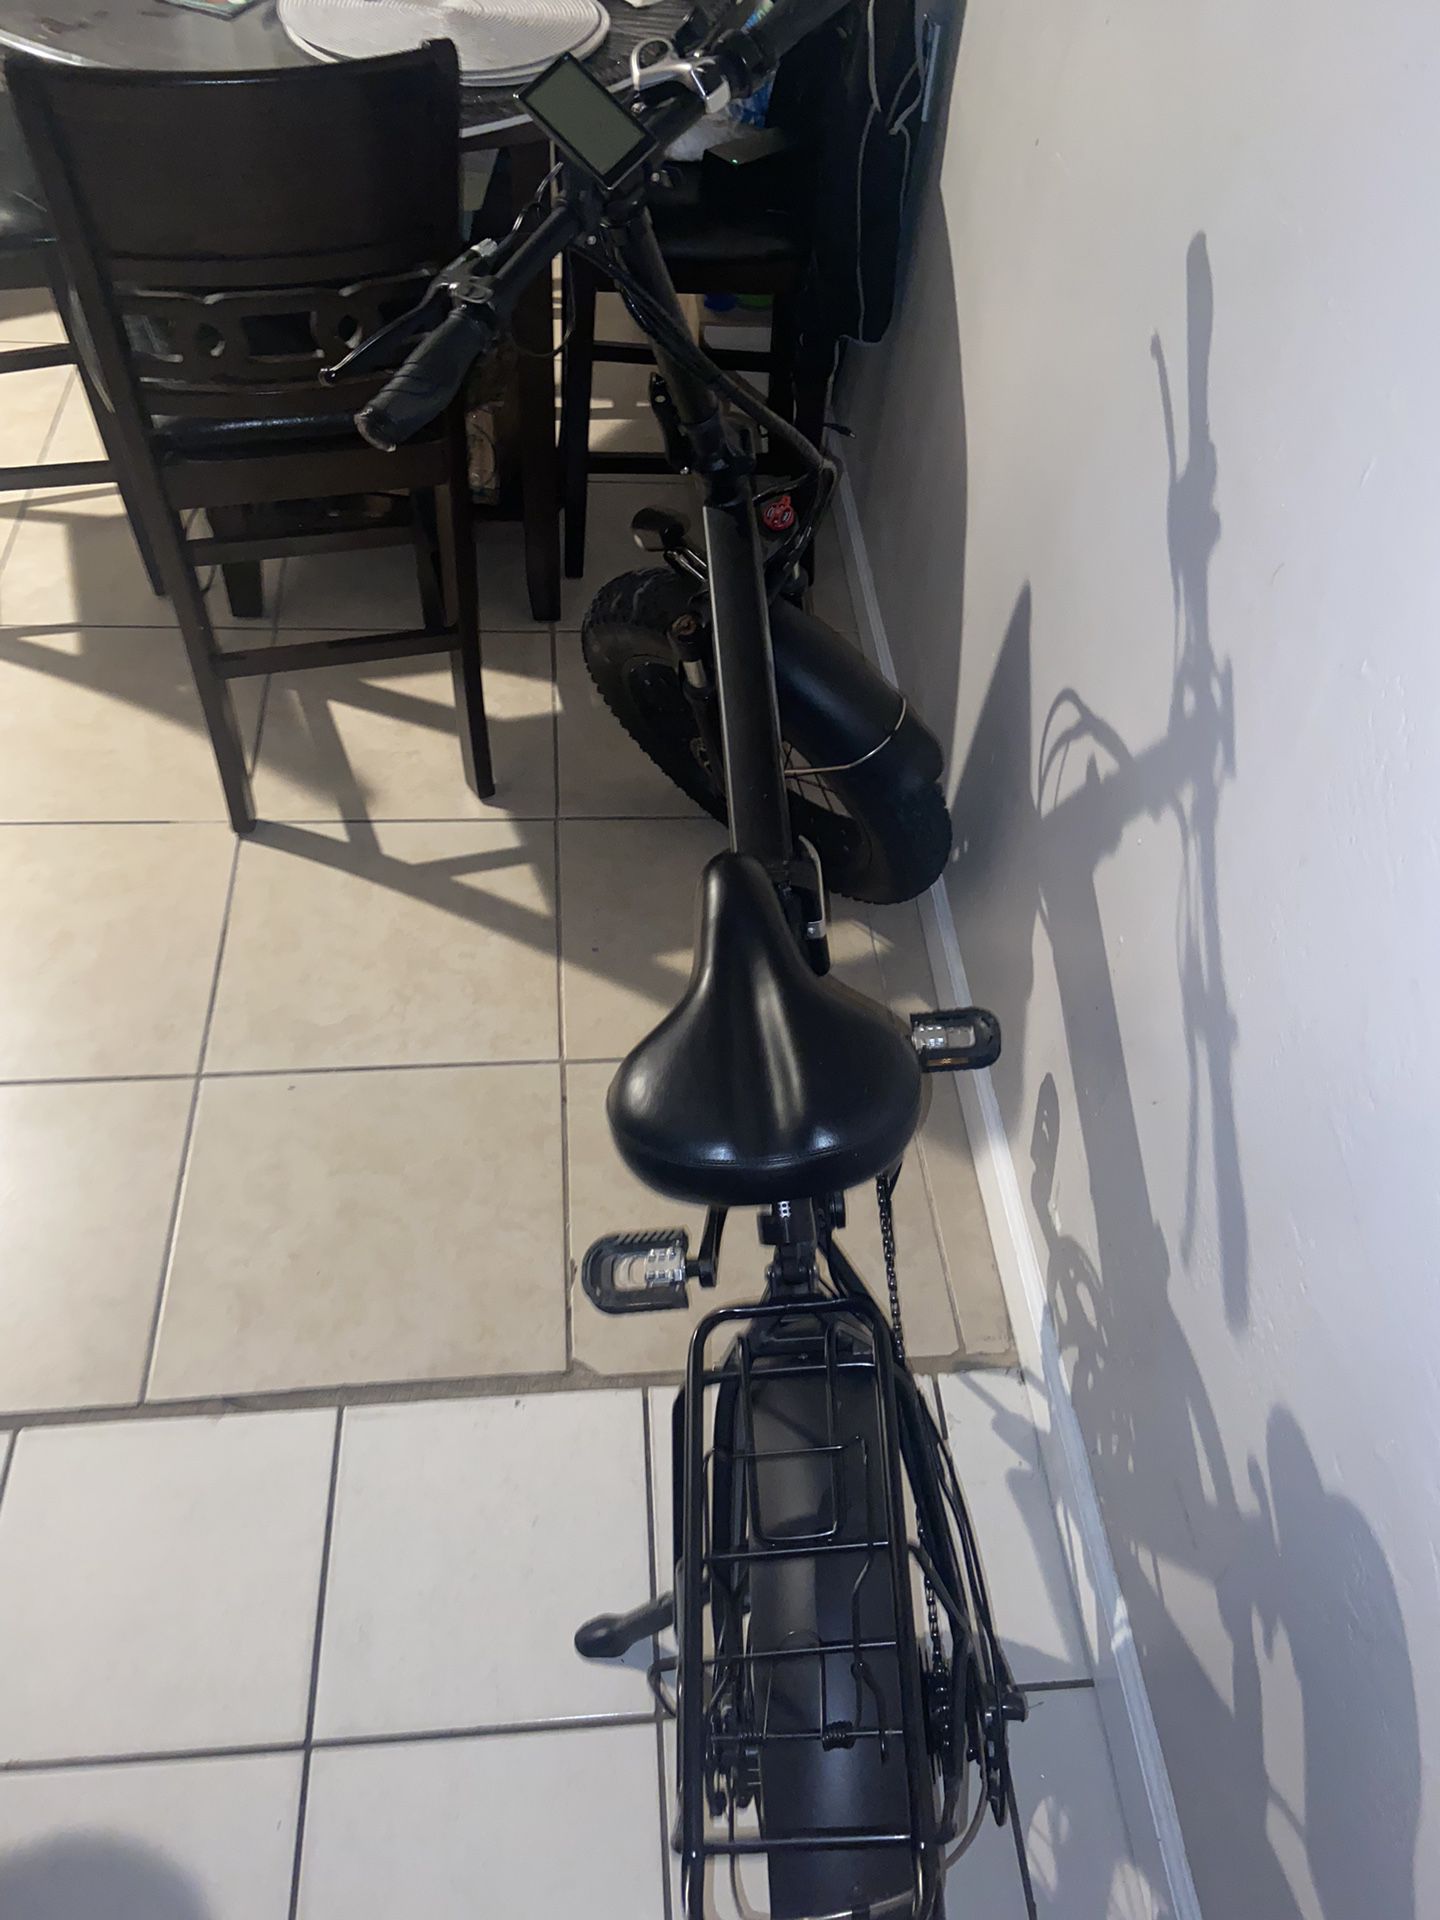 Electric Bike for Sale in San Diego, CA OfferUp